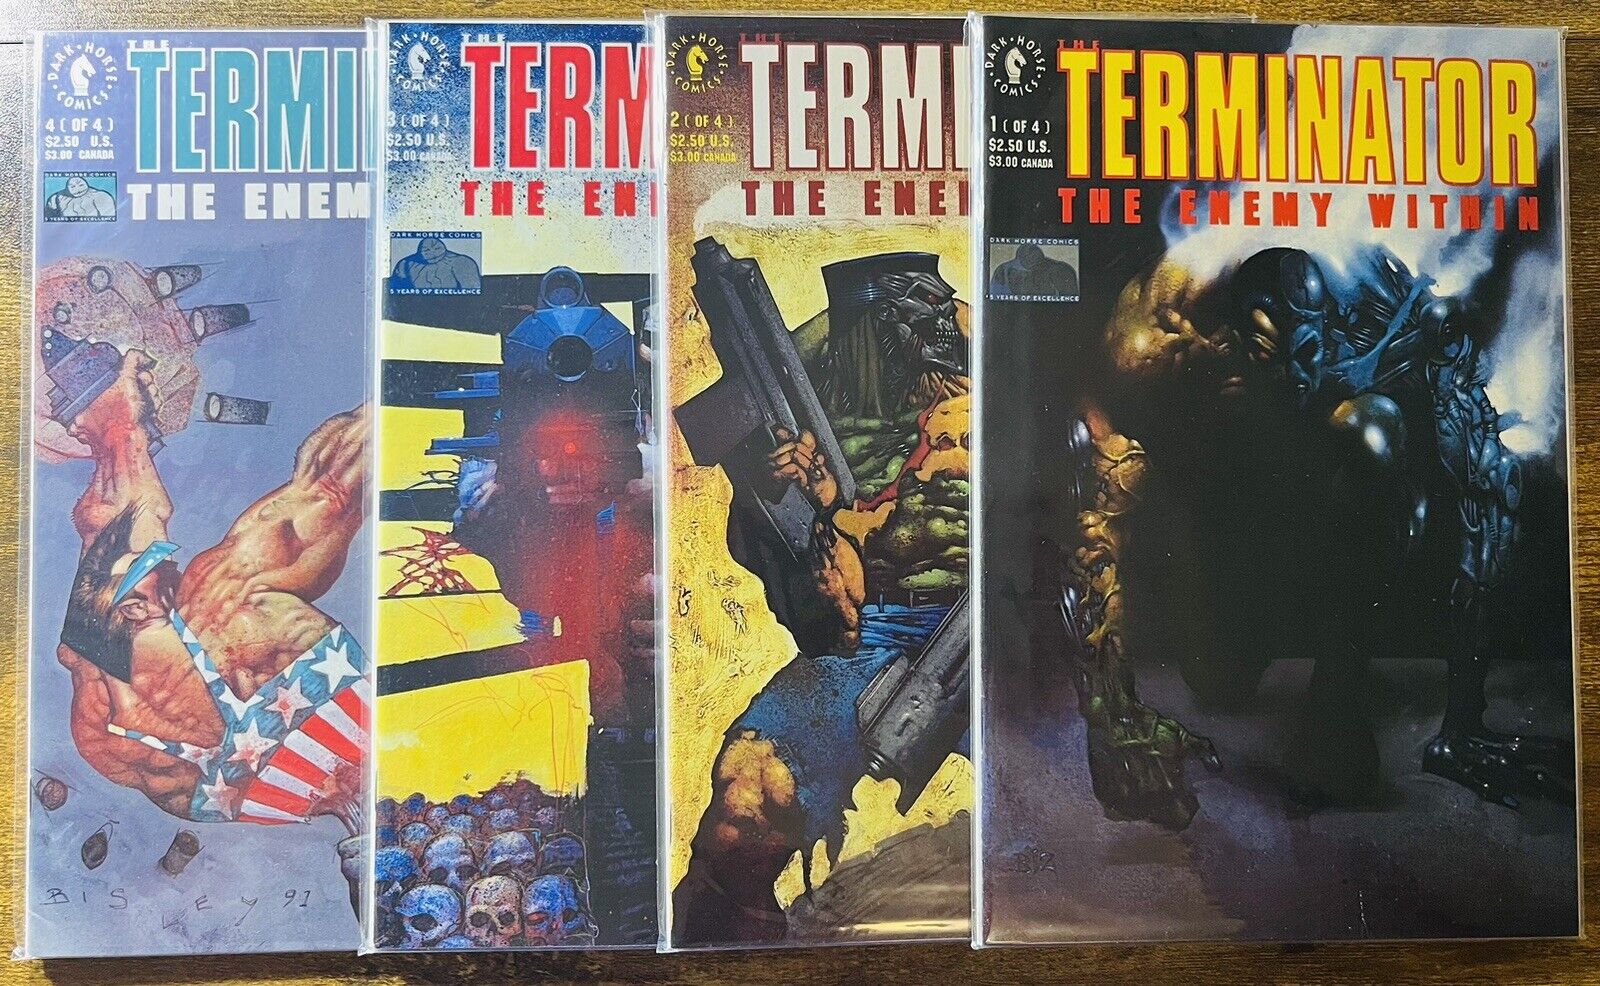 THE TERMINATOR THE ENEMY WITHIN 1-4 COMPLETE SET DARK HORSE COMICS 1991 B